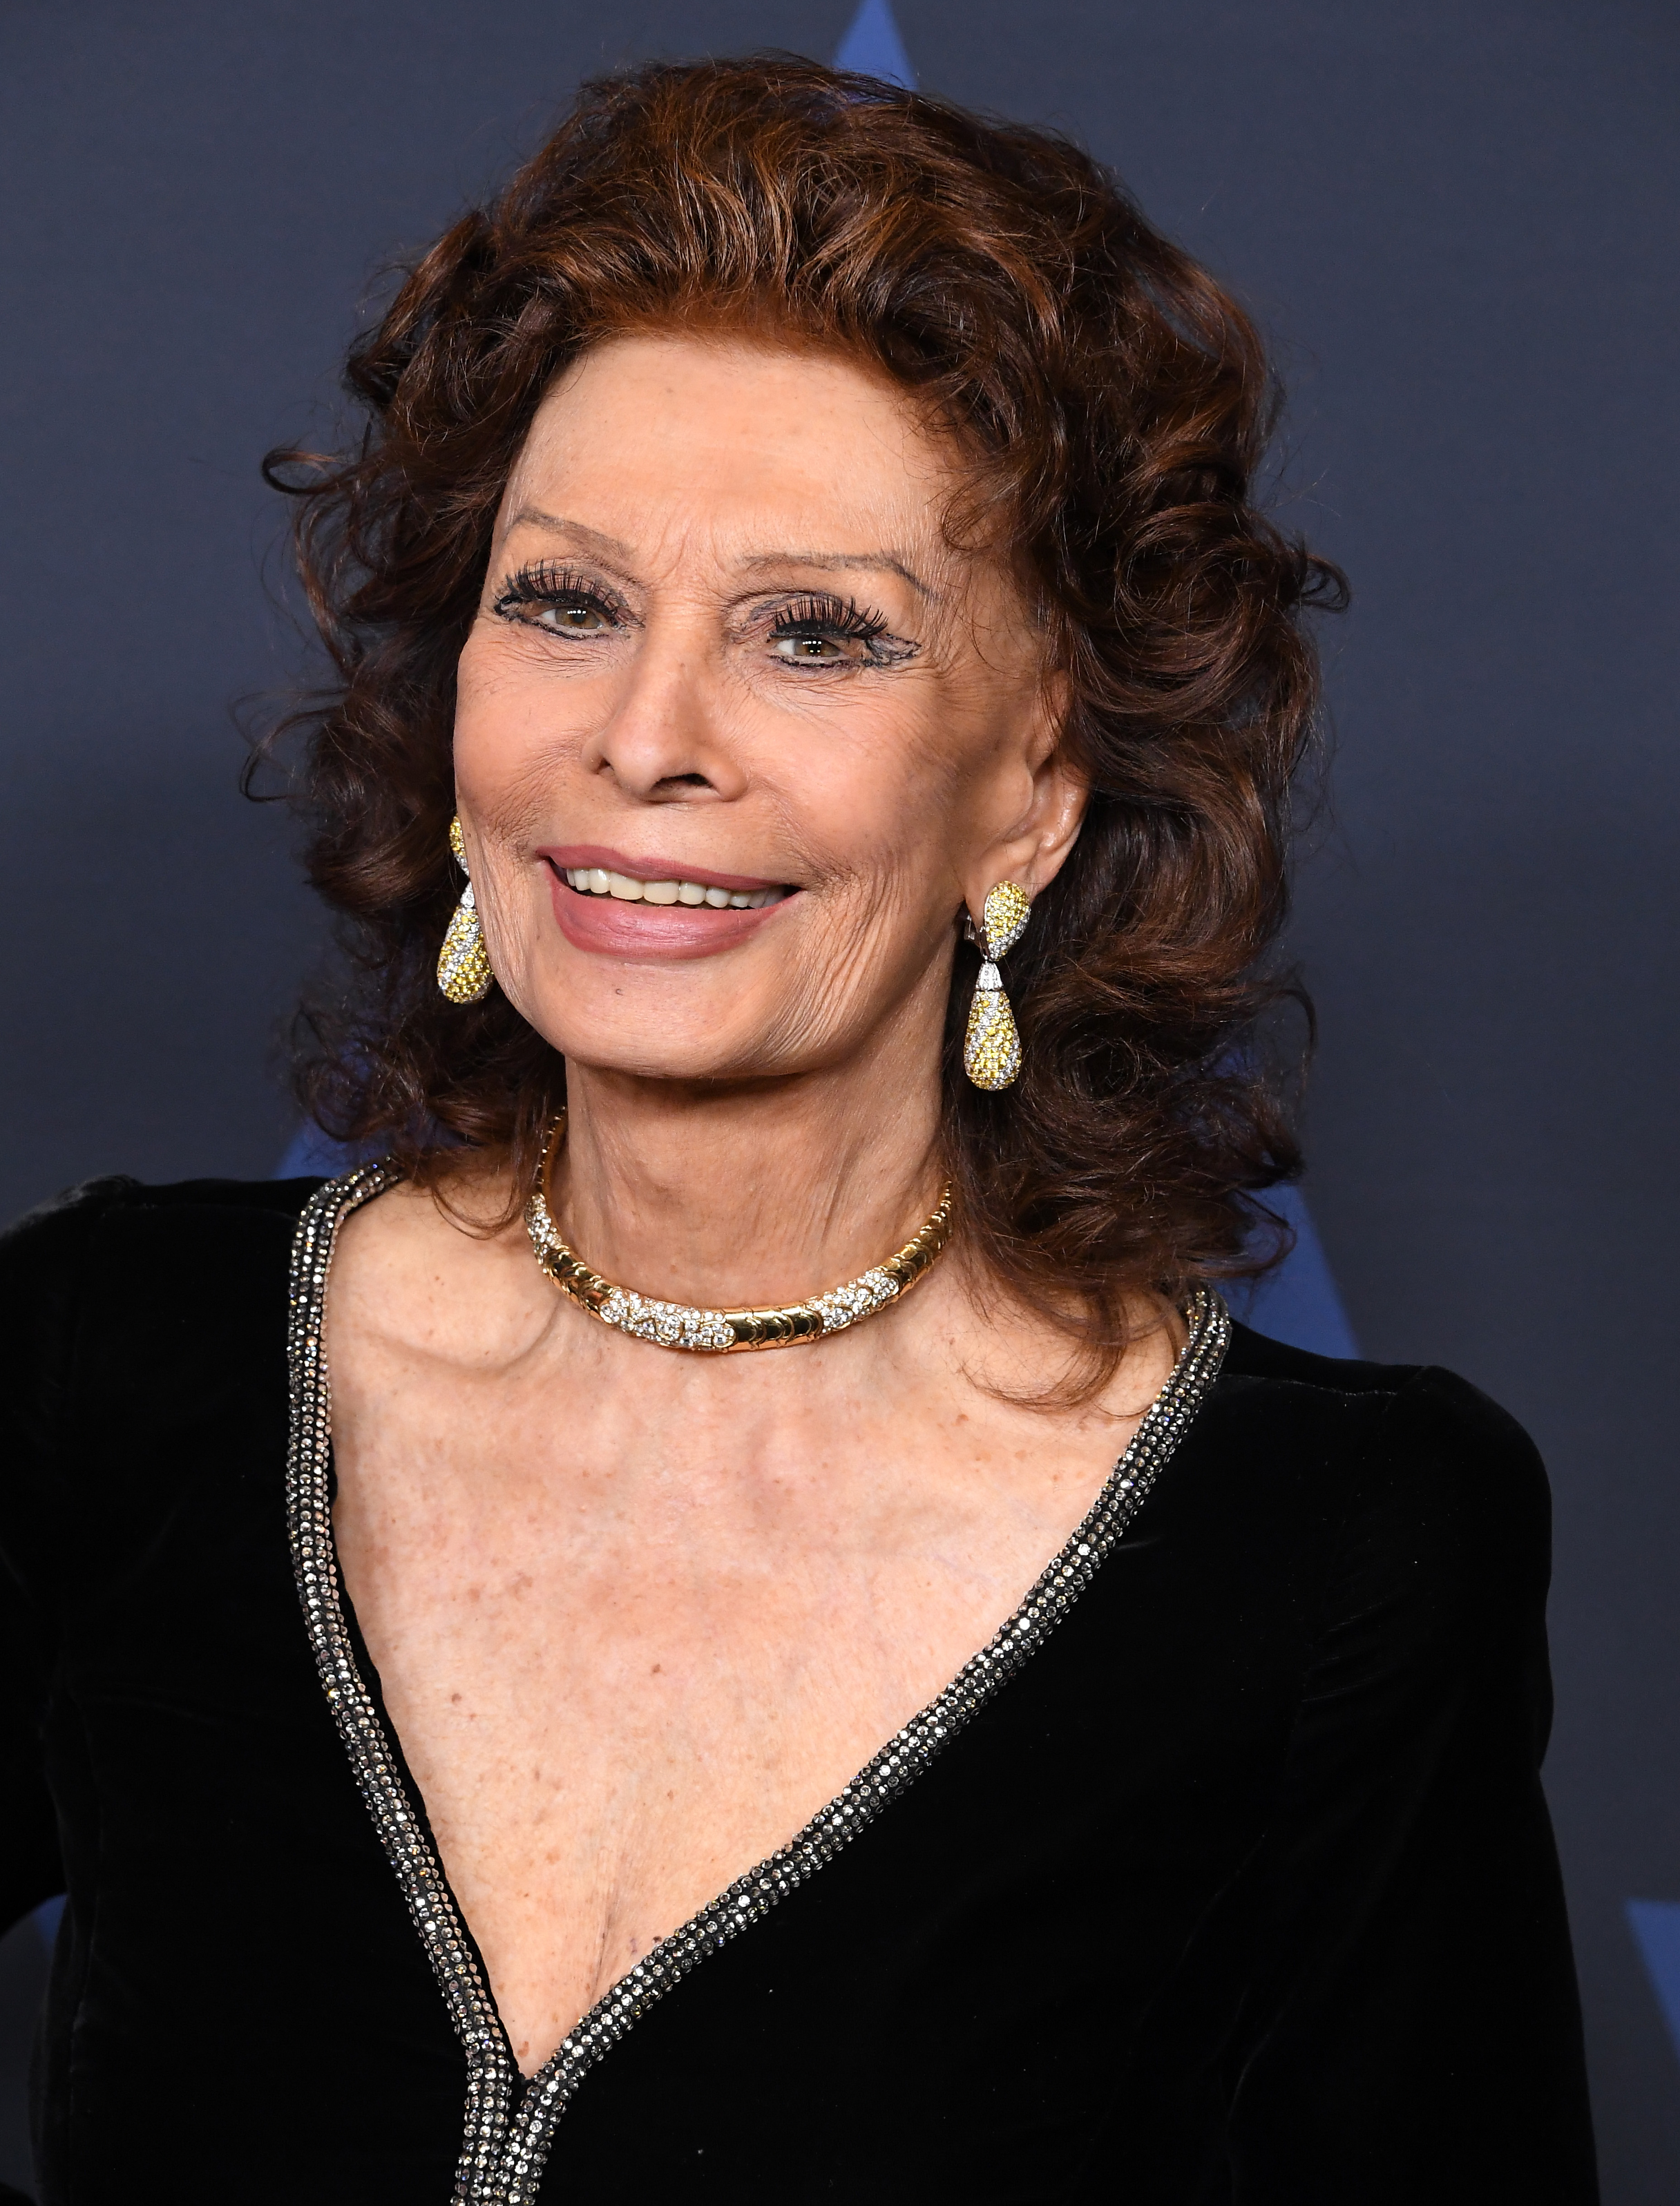 Sophia Loren arrives at the Academy of Motion Picture Arts And Sciences' 11th Annual Governors Awards at The Ray Dolby Ballroom in Hollywood, California on October 27, 2019 | Source: Getty Images